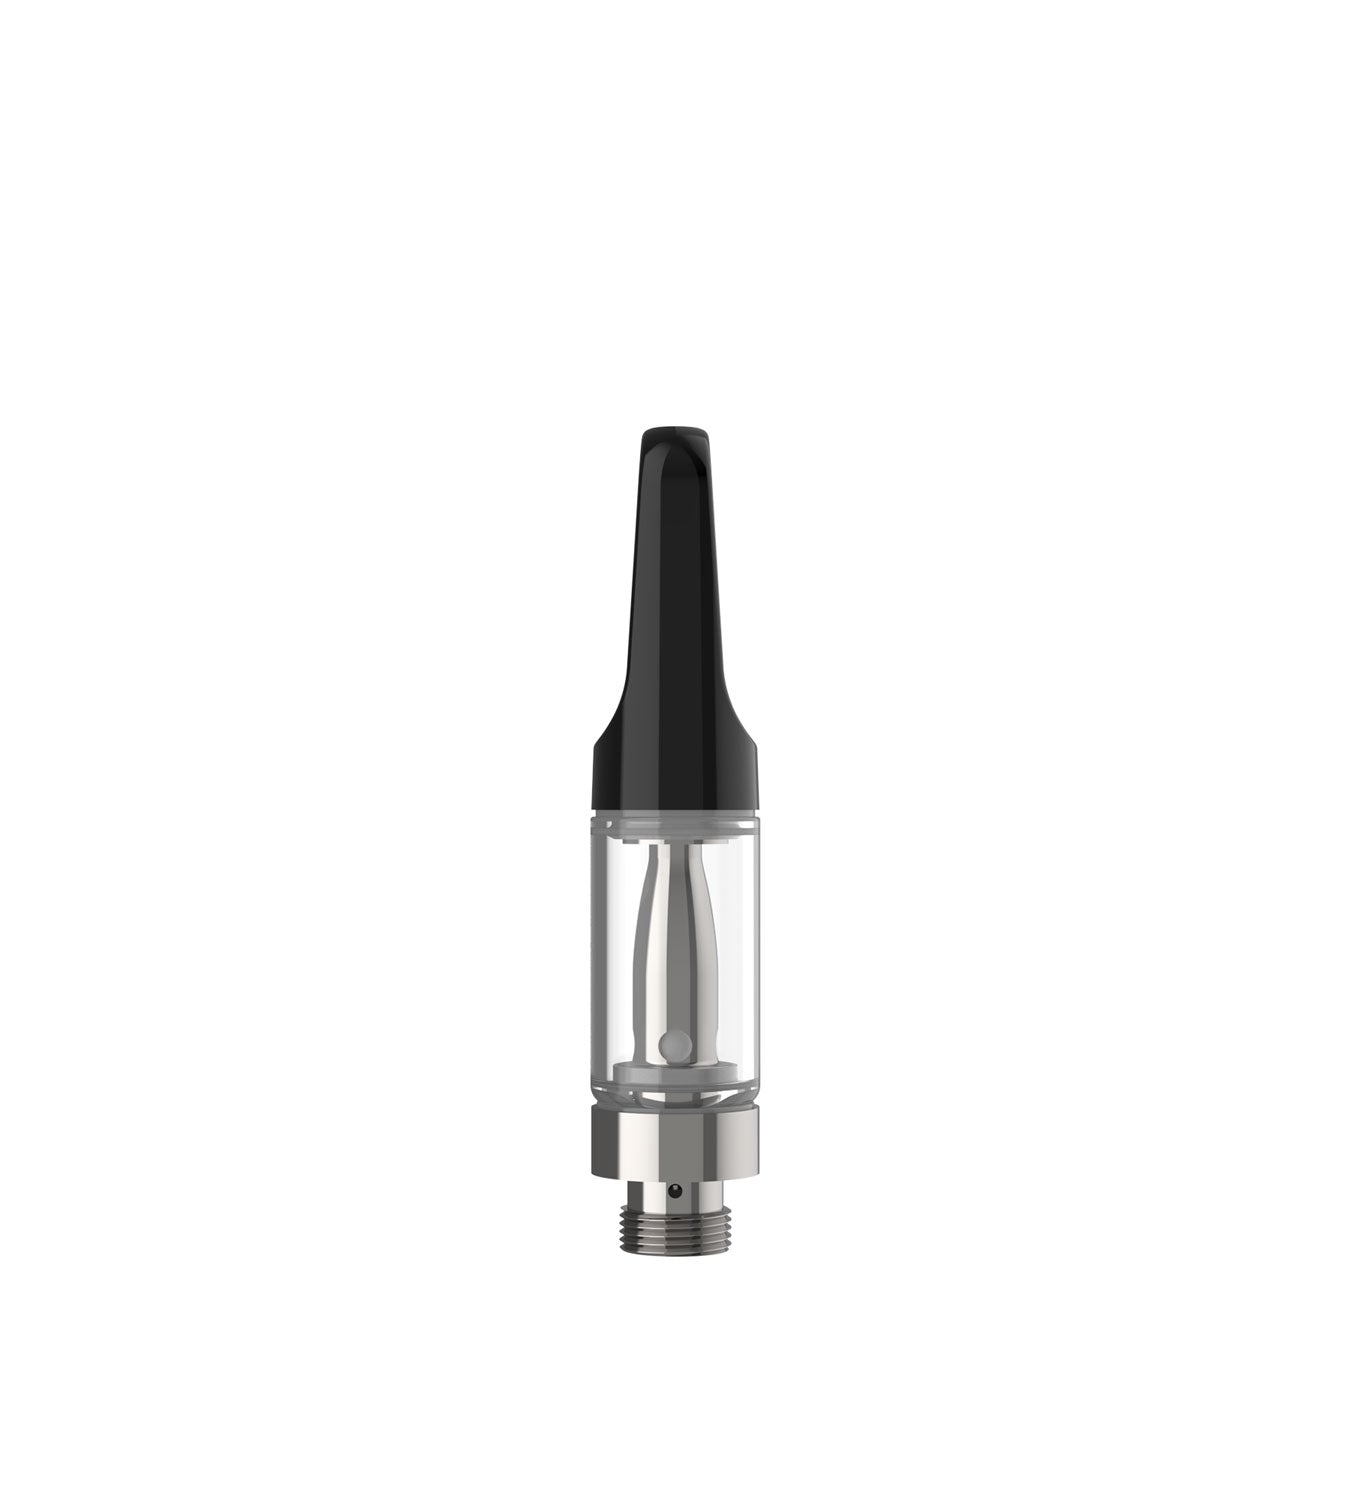 CCELL carts